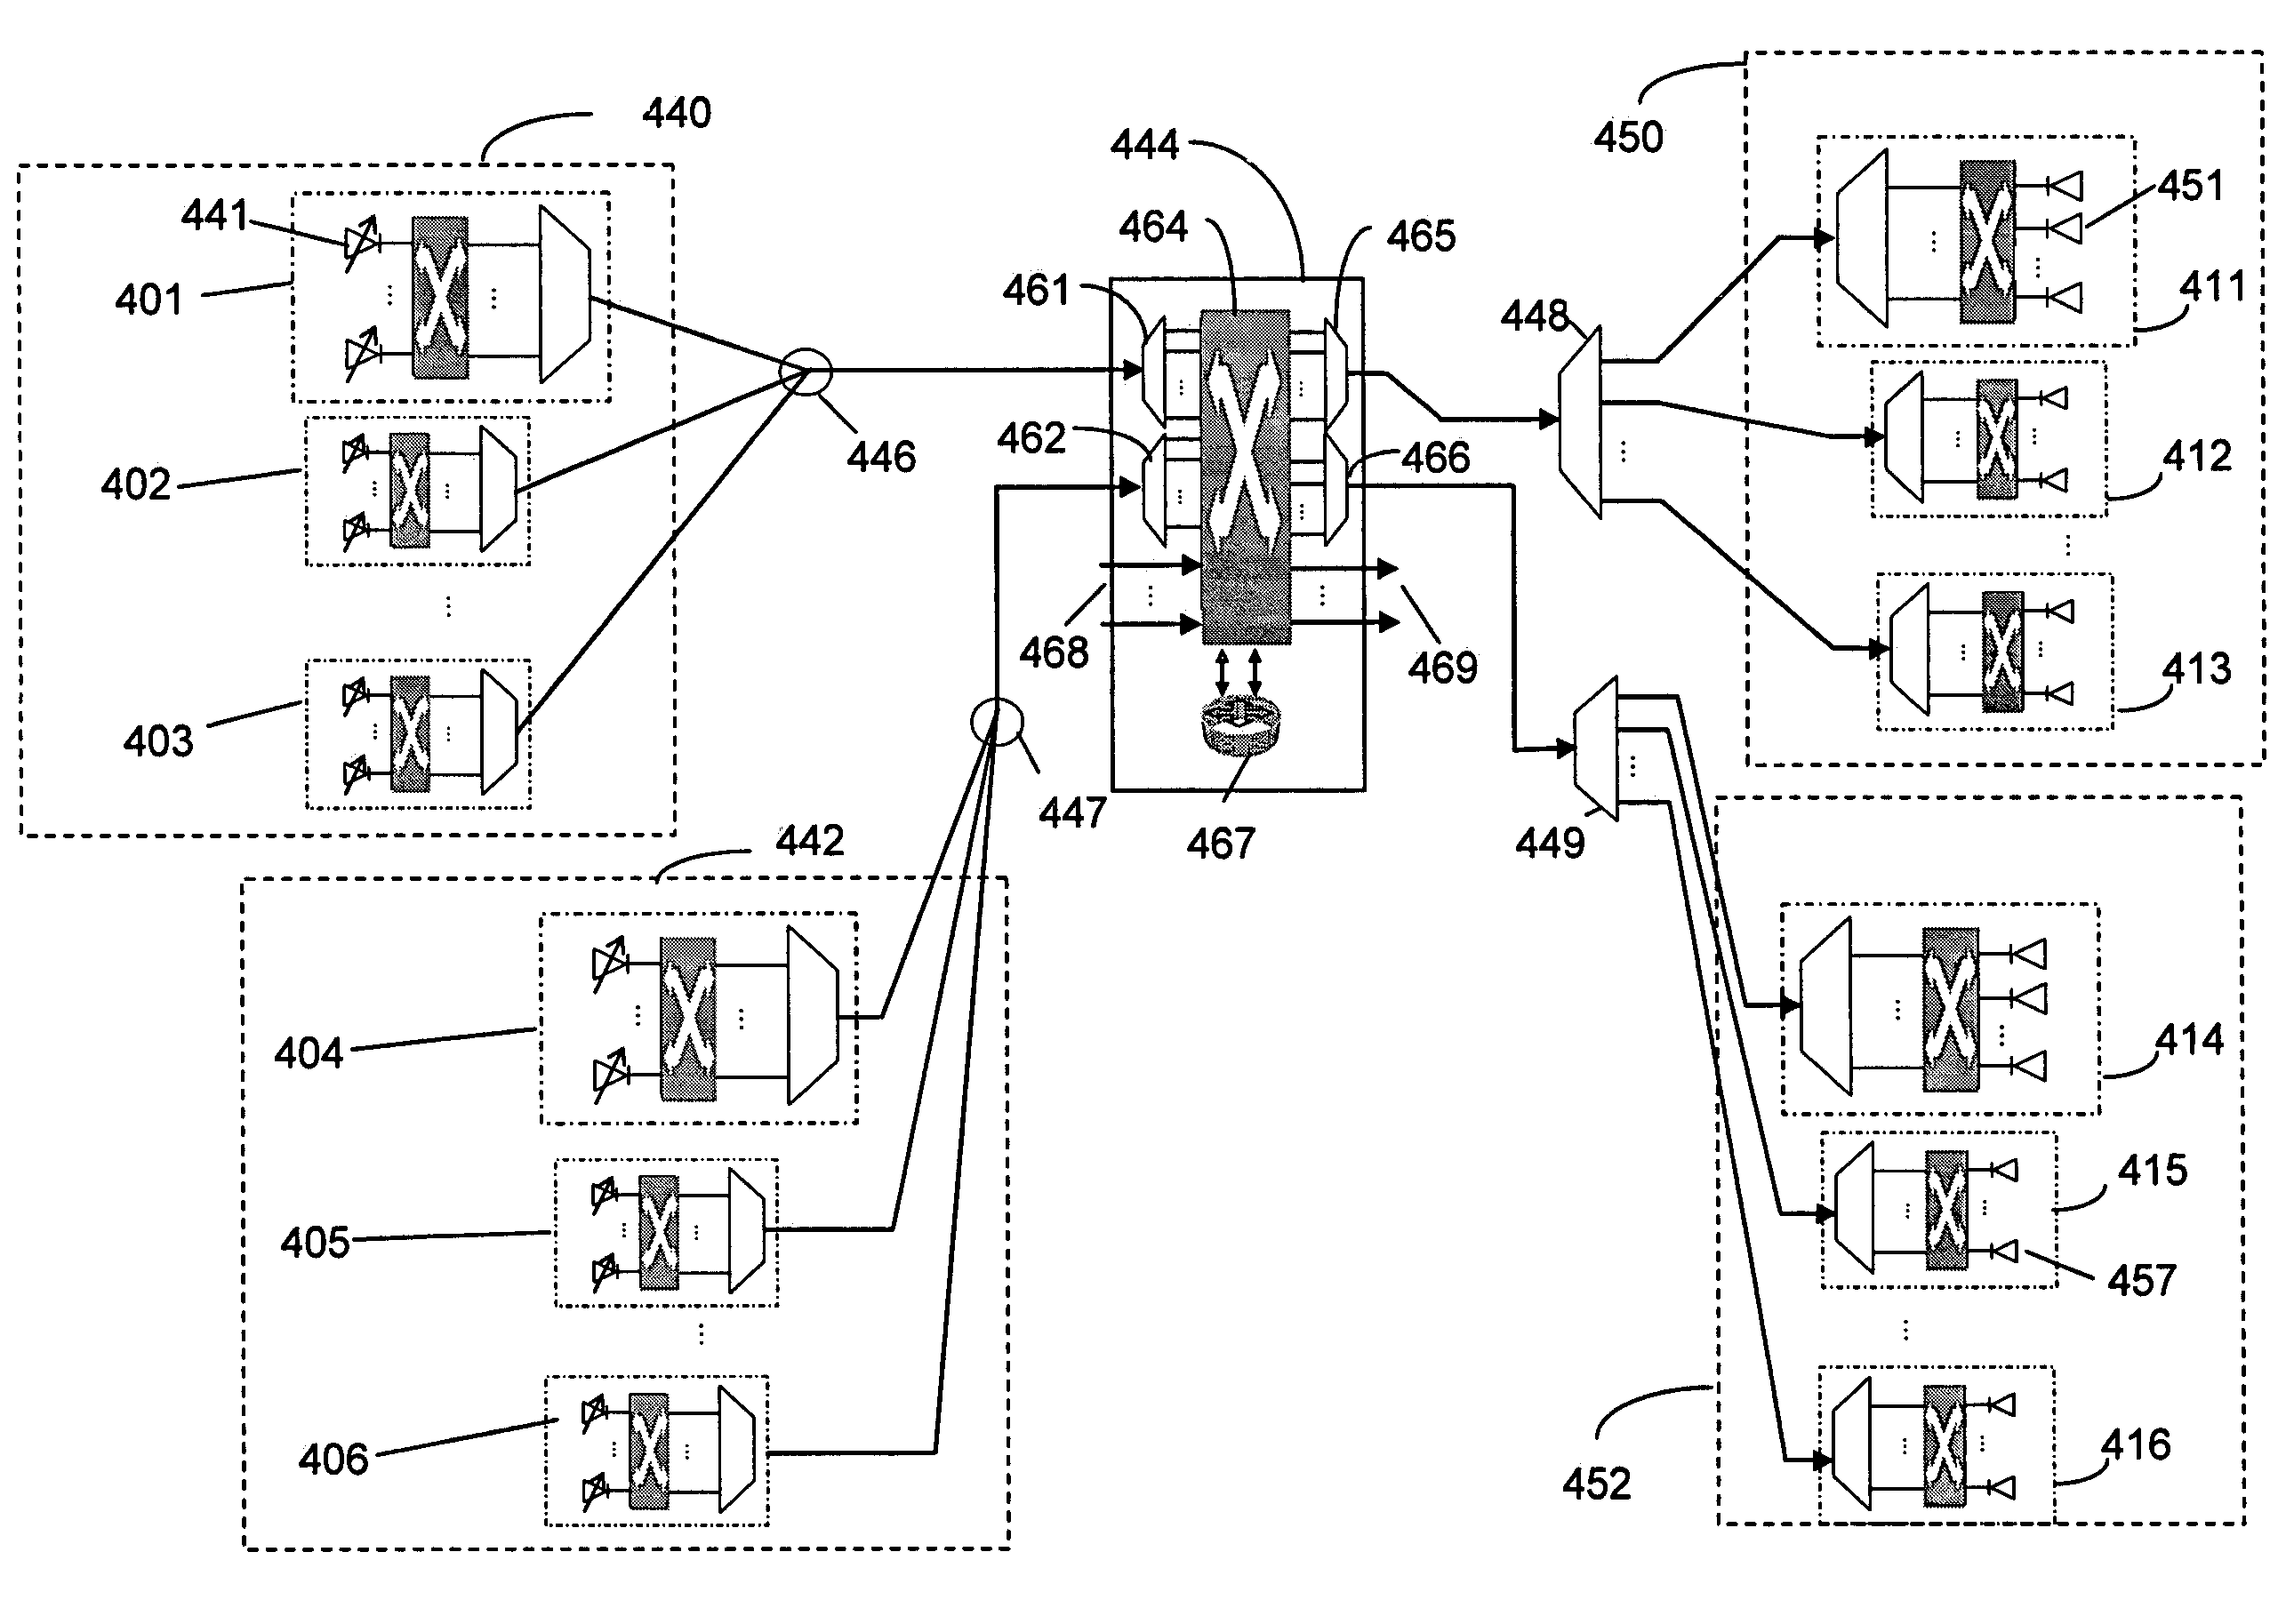 Architecture for dynamic connectivity in an edge photonic network architecture